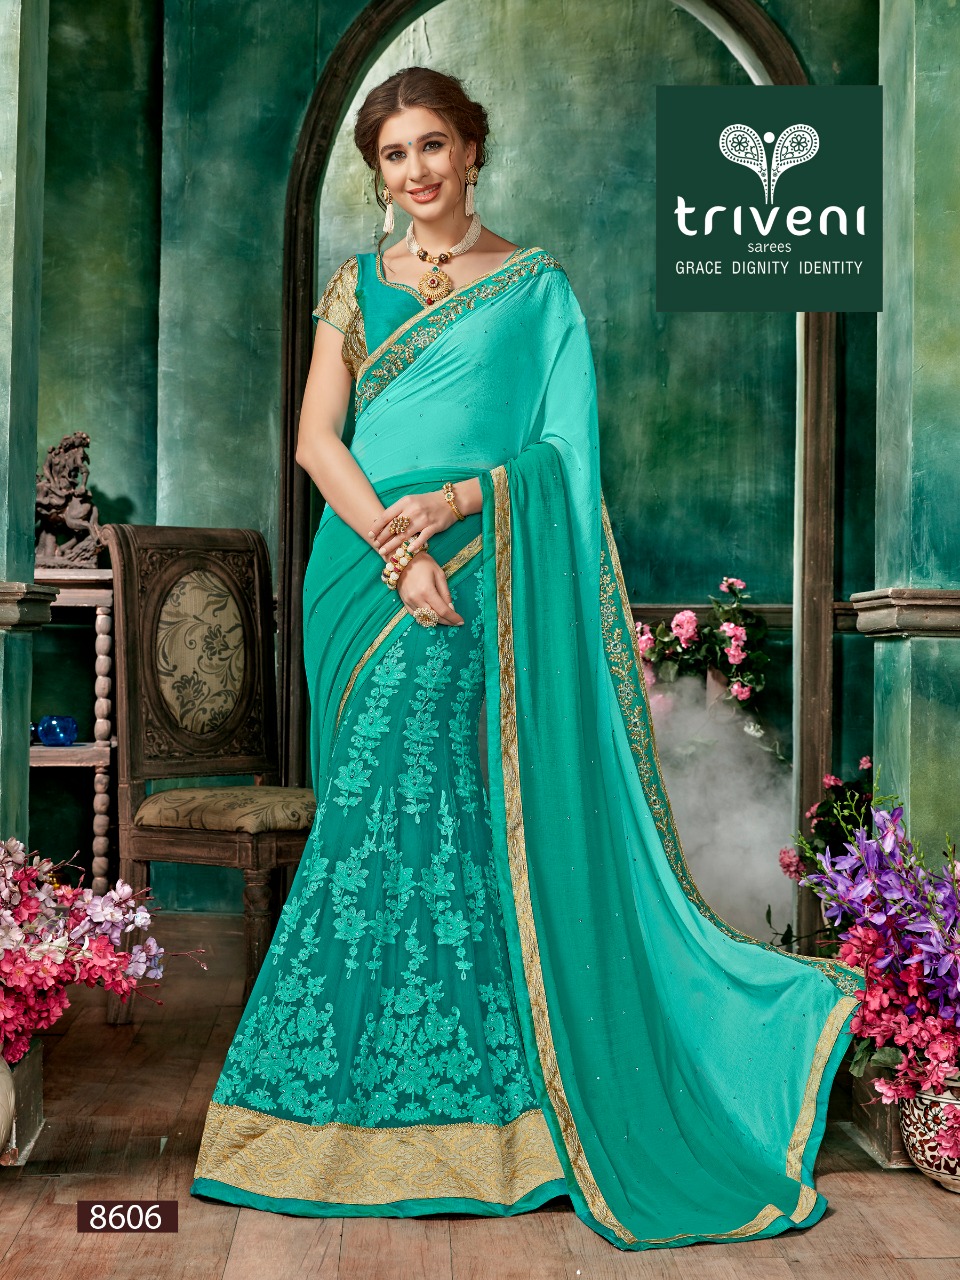 triveni devanshi colorful fancy collection of sarees at reasonable rate